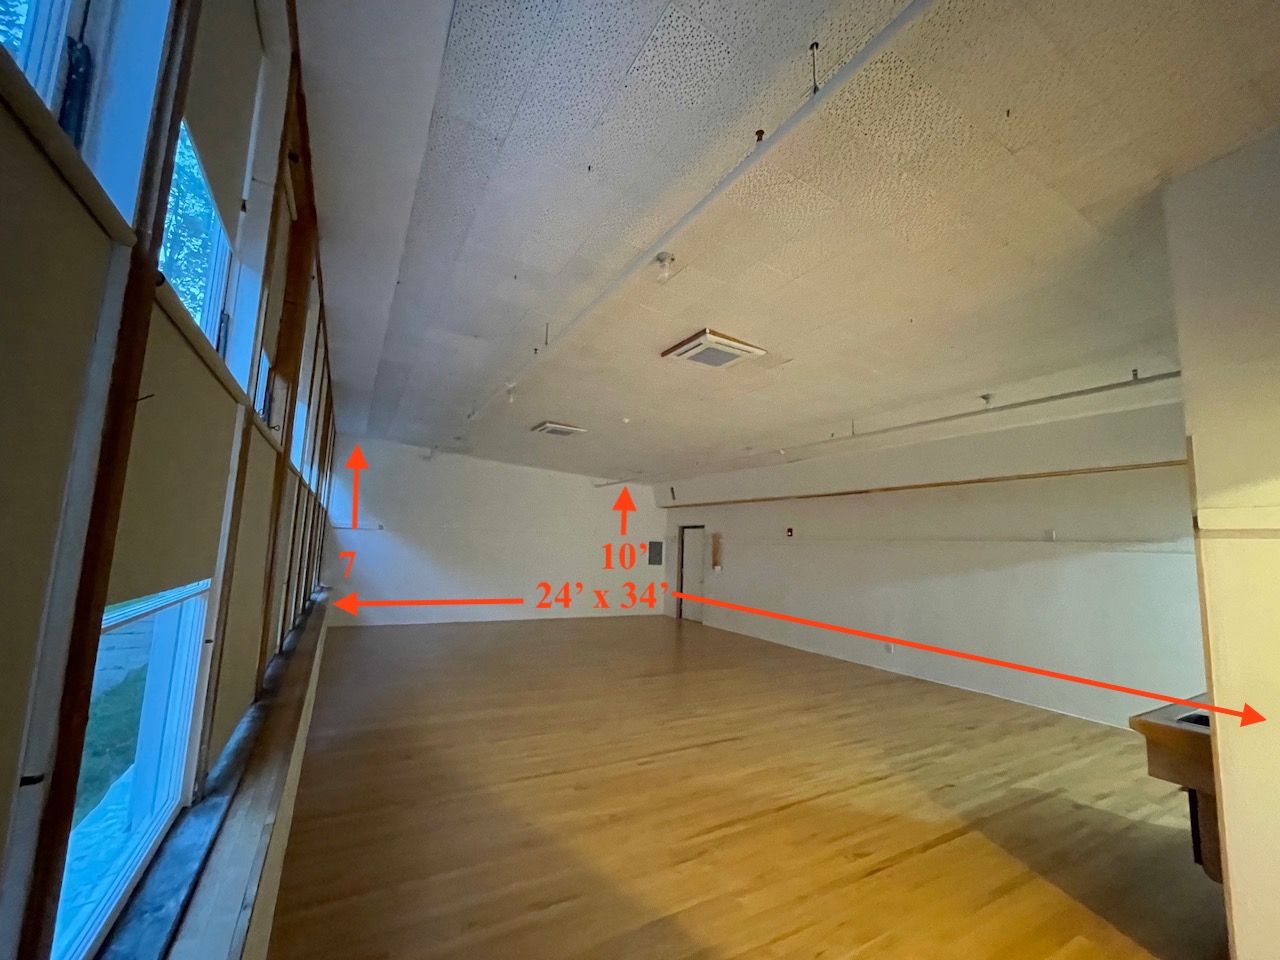 Full floor view of a 24' x 35' room with 10' ceilings sloping to 11'